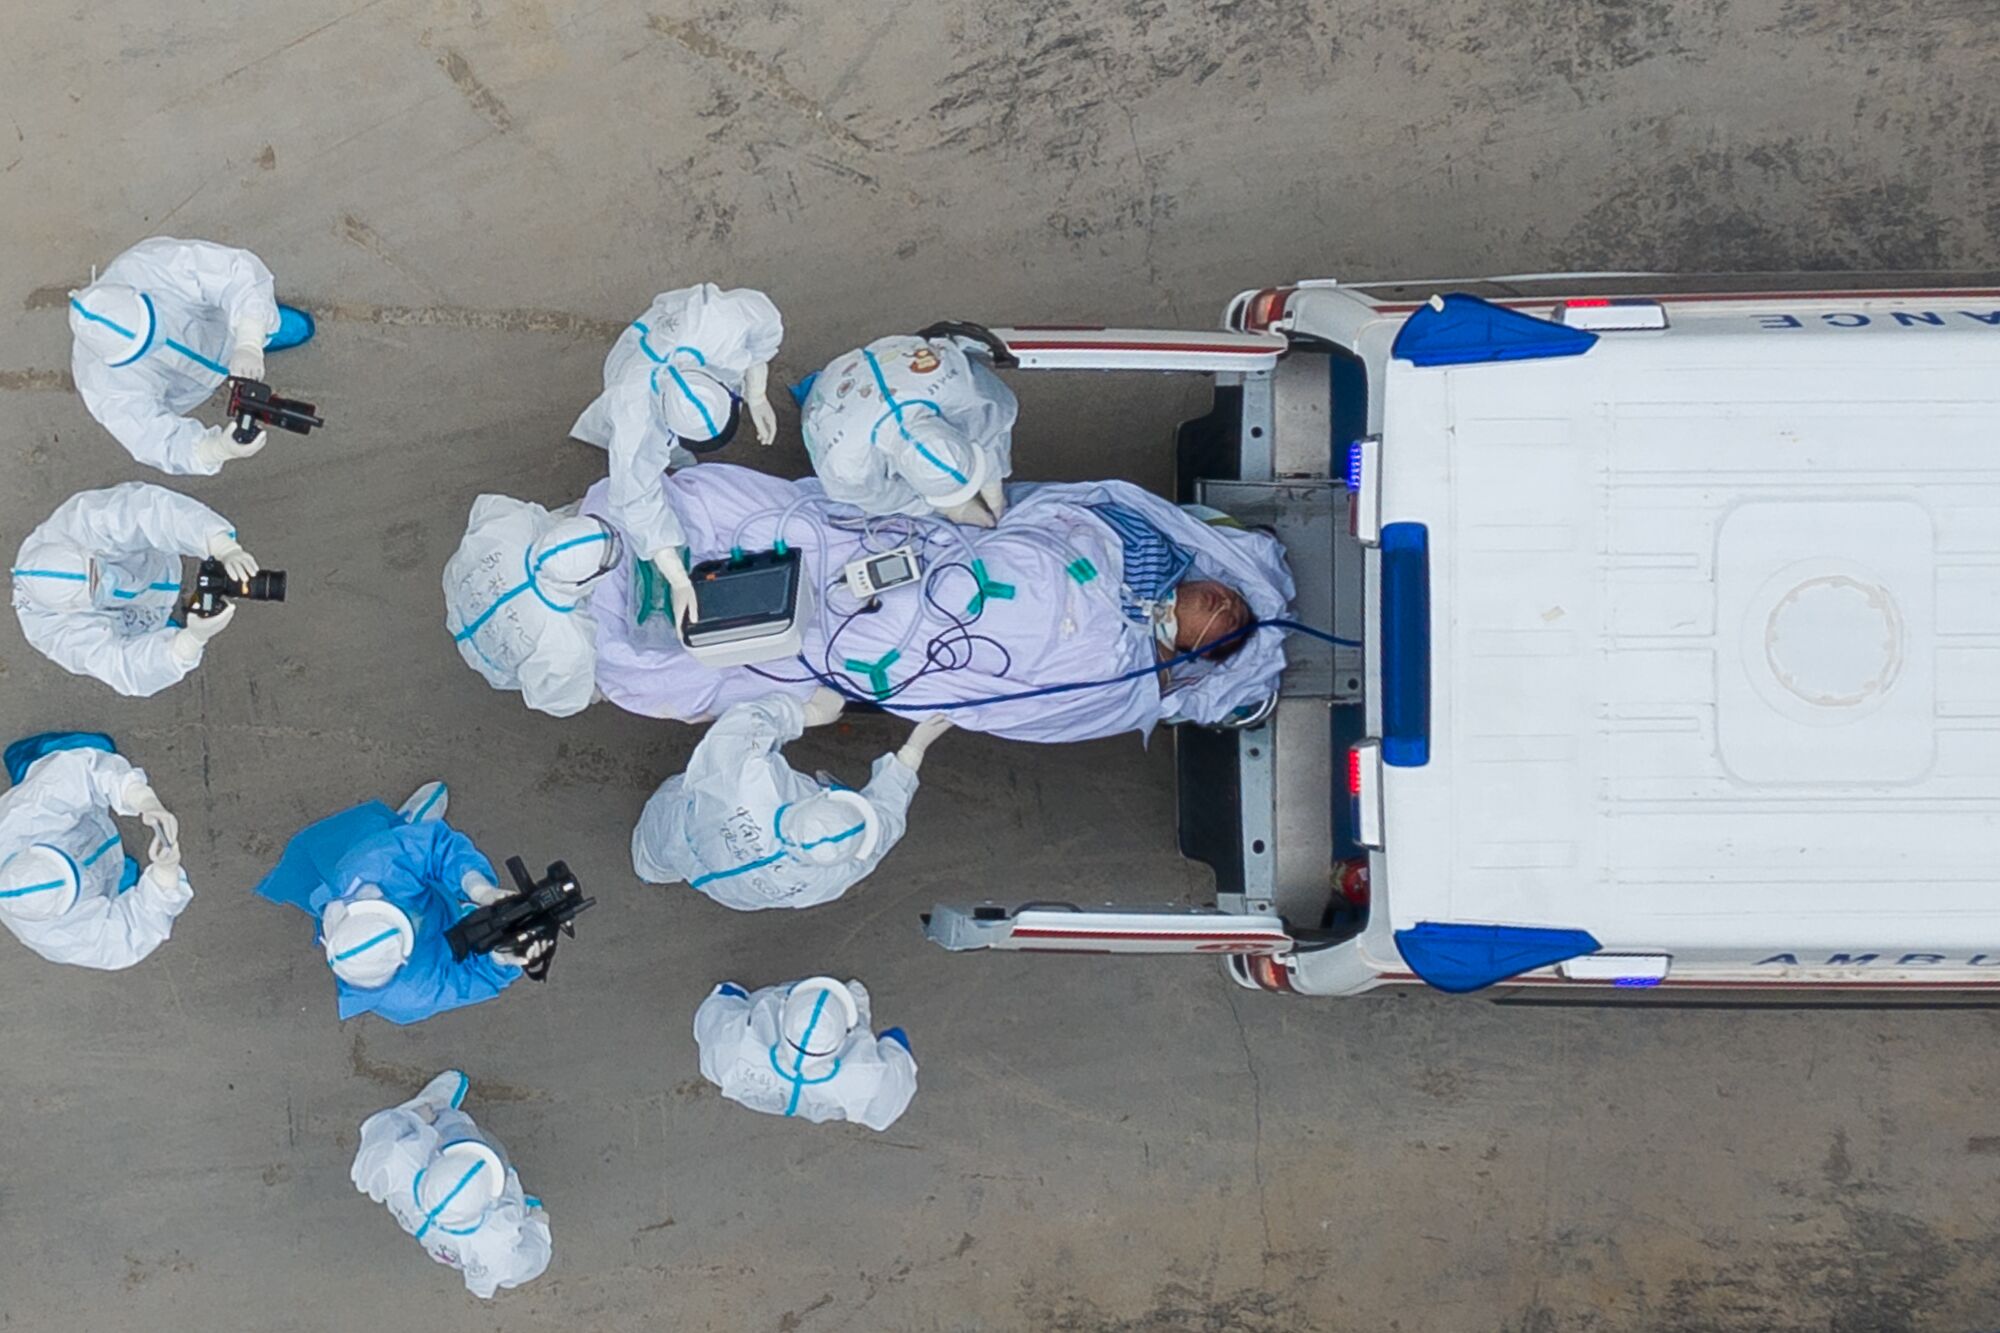 Ambulances carrying patients in Wuhan, China